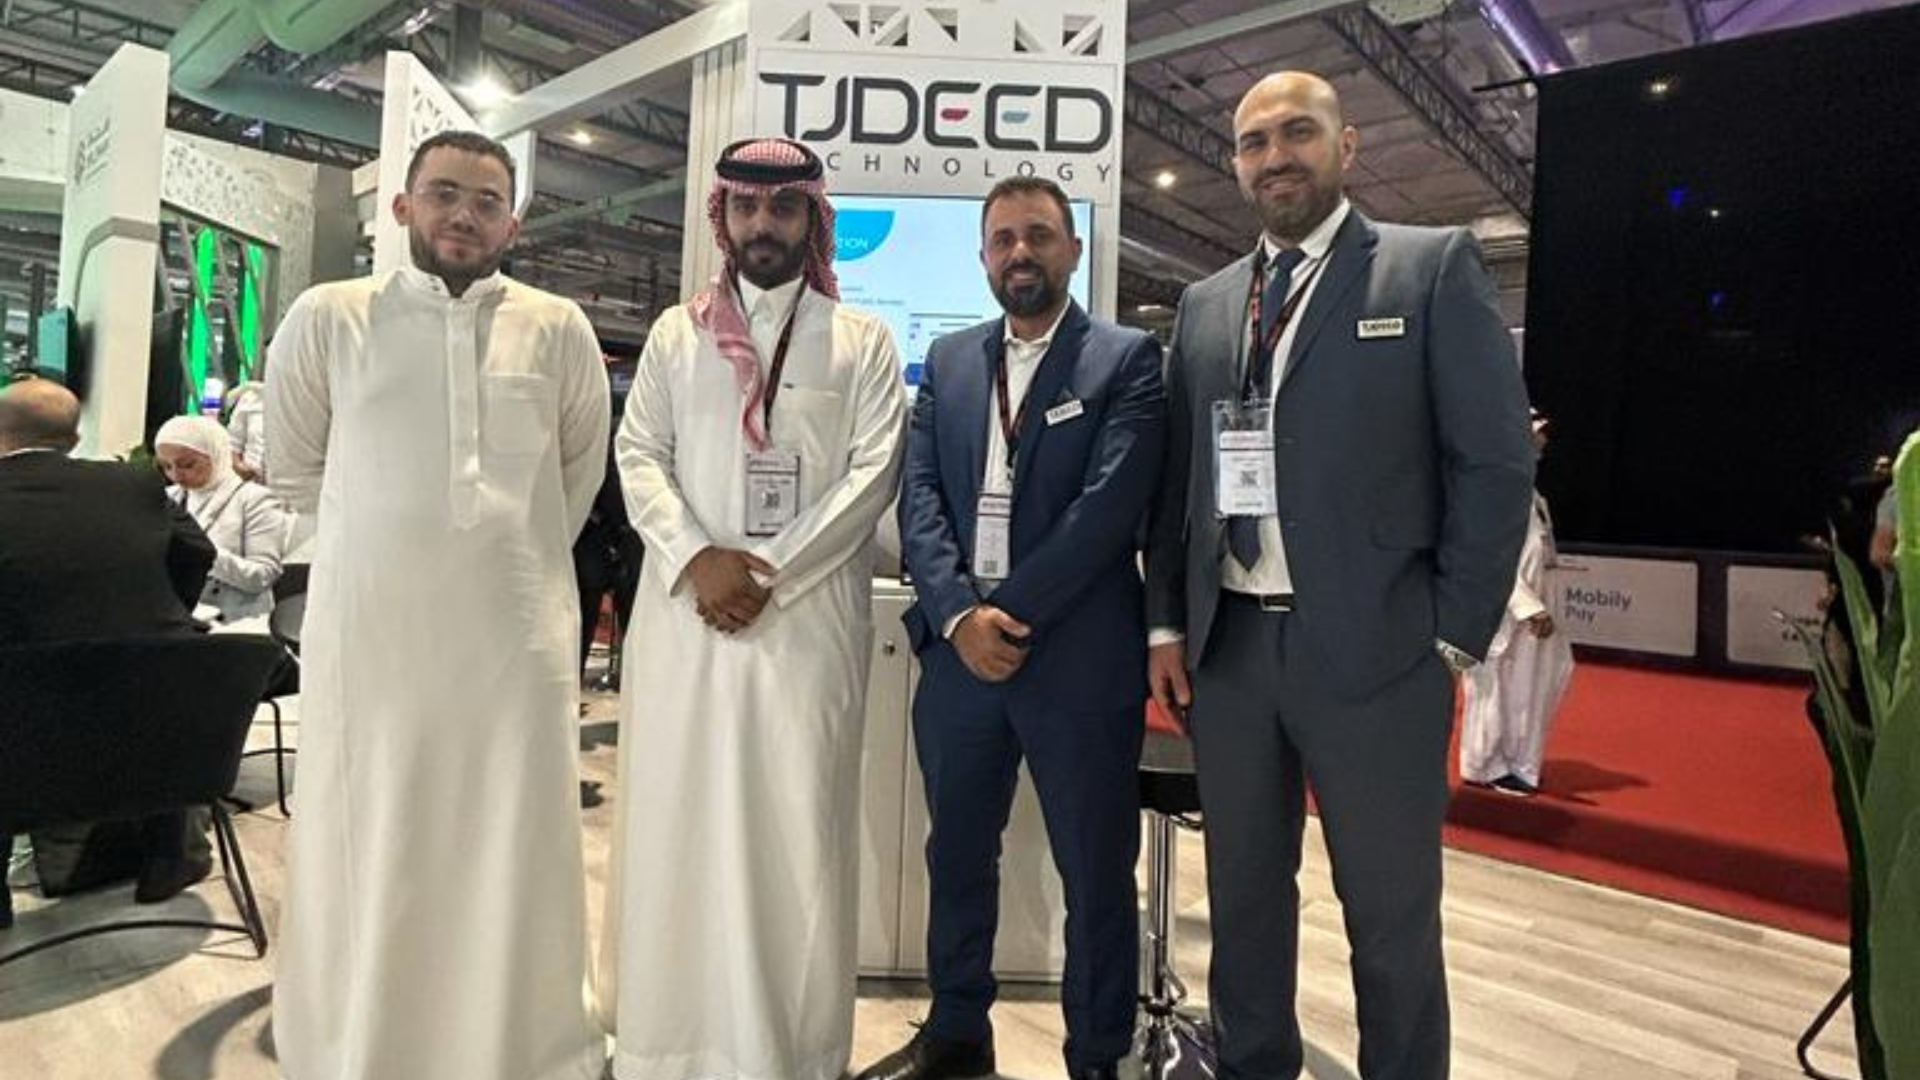 TJDEED Technology Shines at Seamless Saudi Arabia2023: Leading the Way in IT Solutions